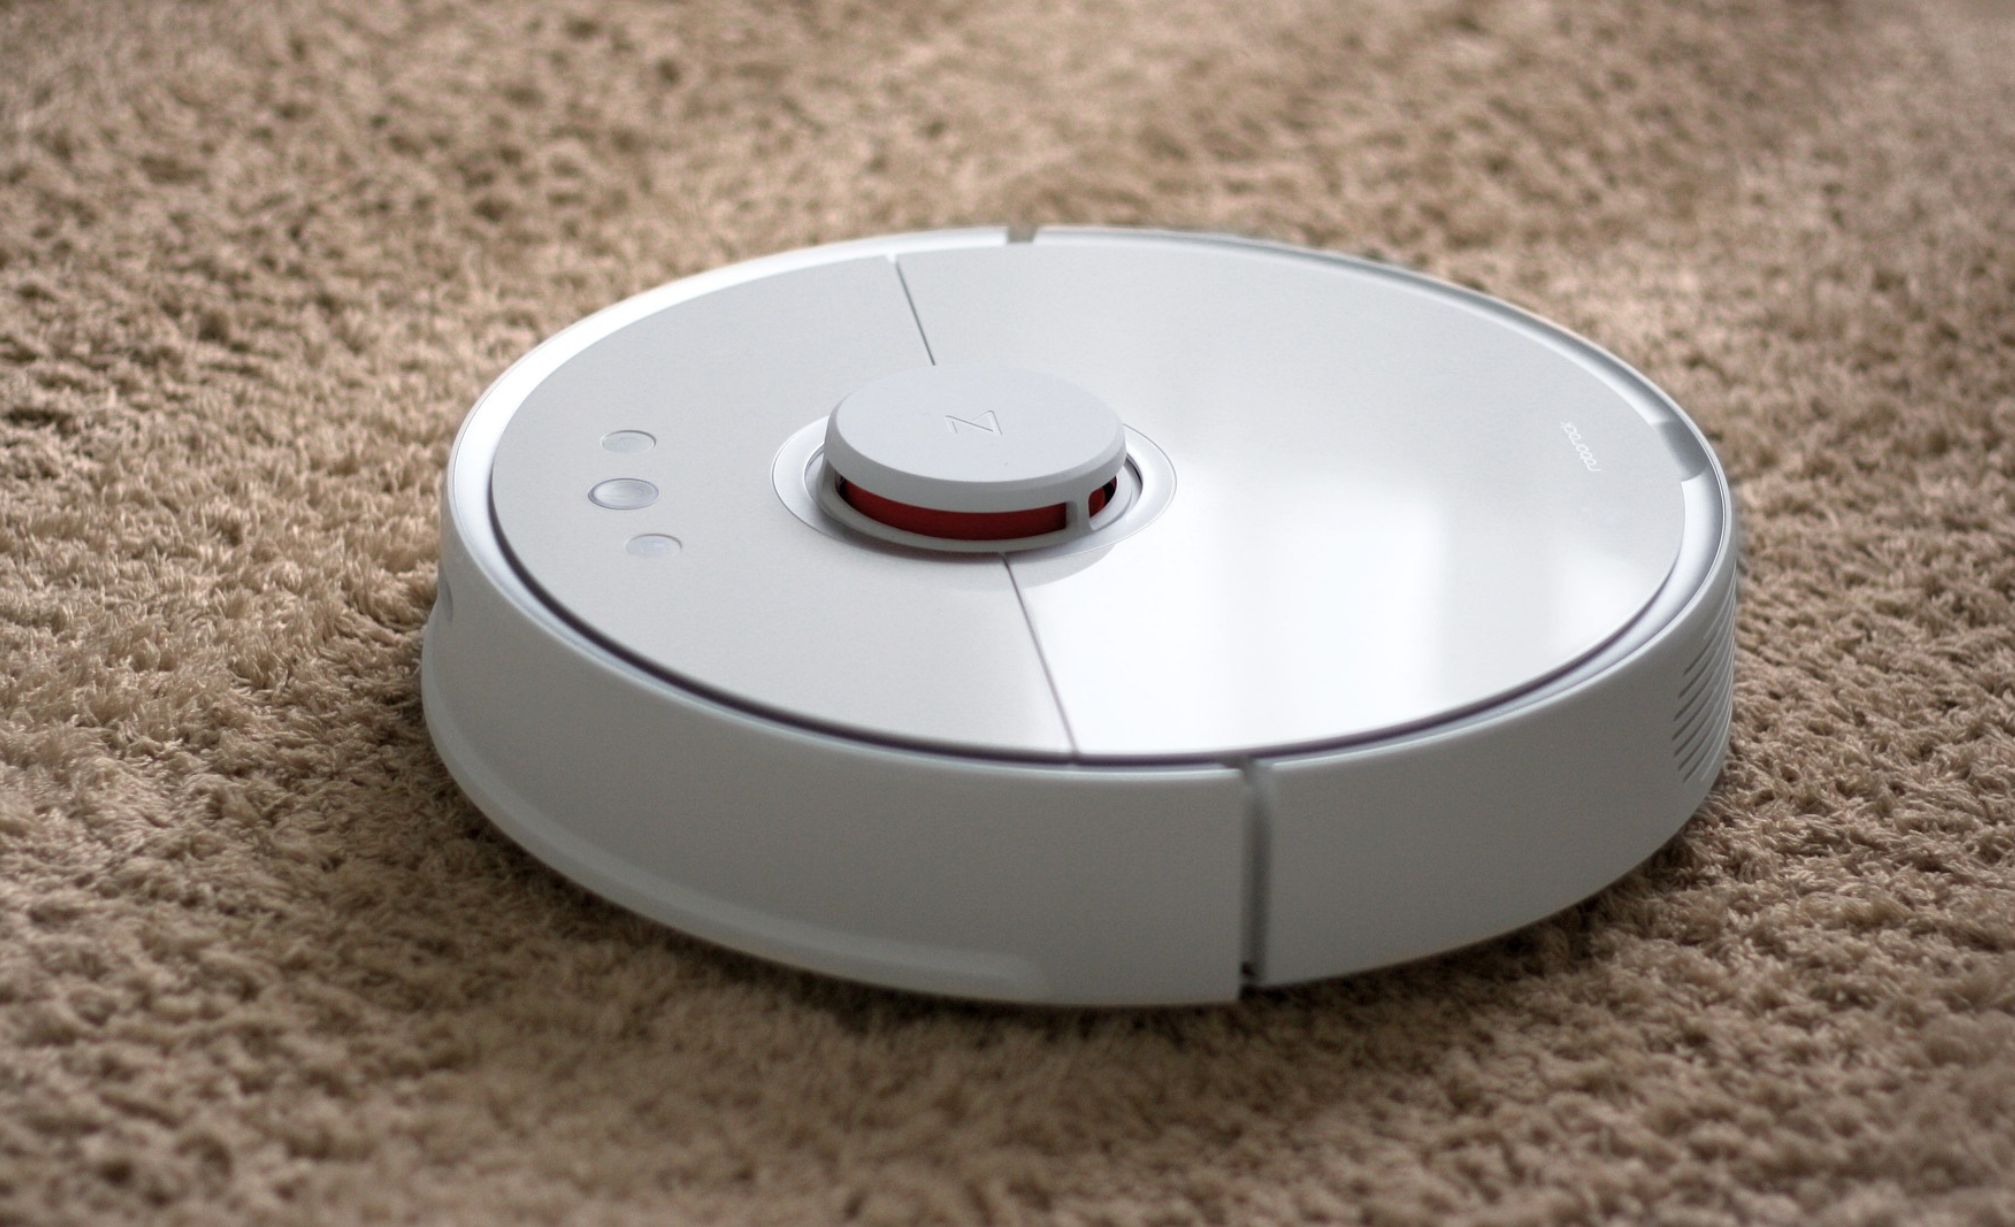 A robot vacuum cleaning a carpet